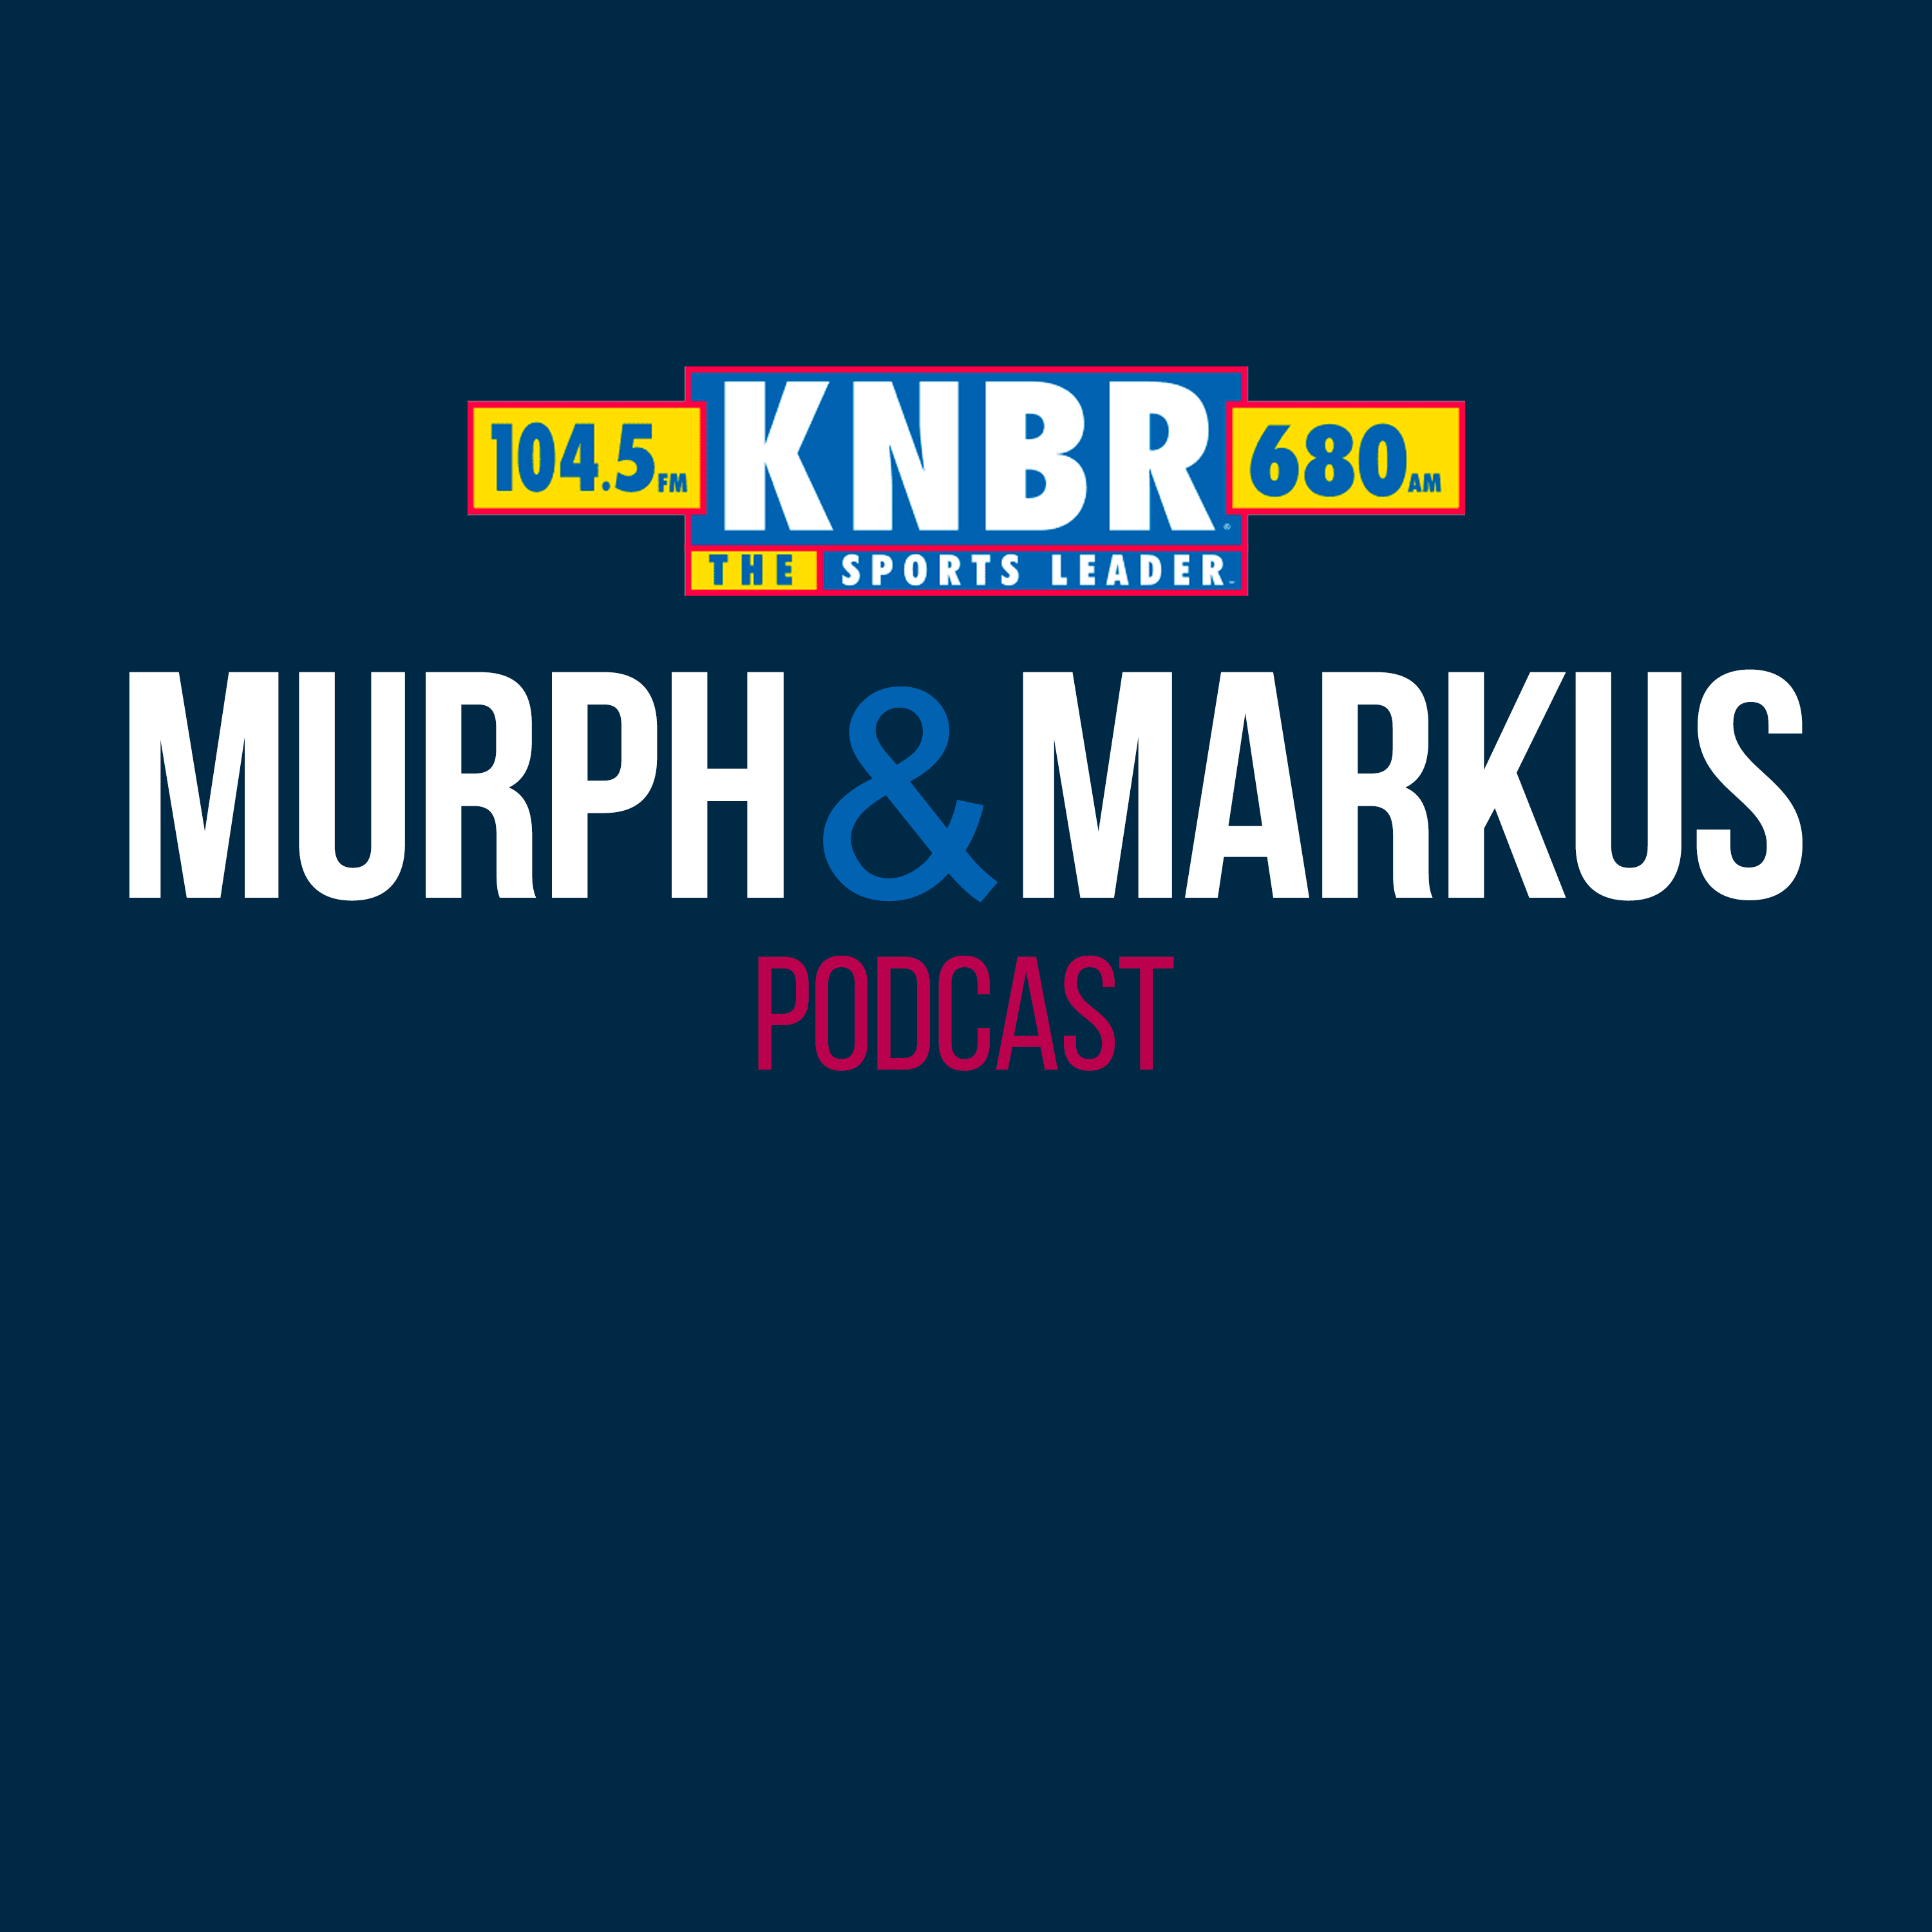 5-10 Mike Krukow tells Murph & Markus that the Giants feel like they're capable of doing so much more and playing better baseball than their current record shows